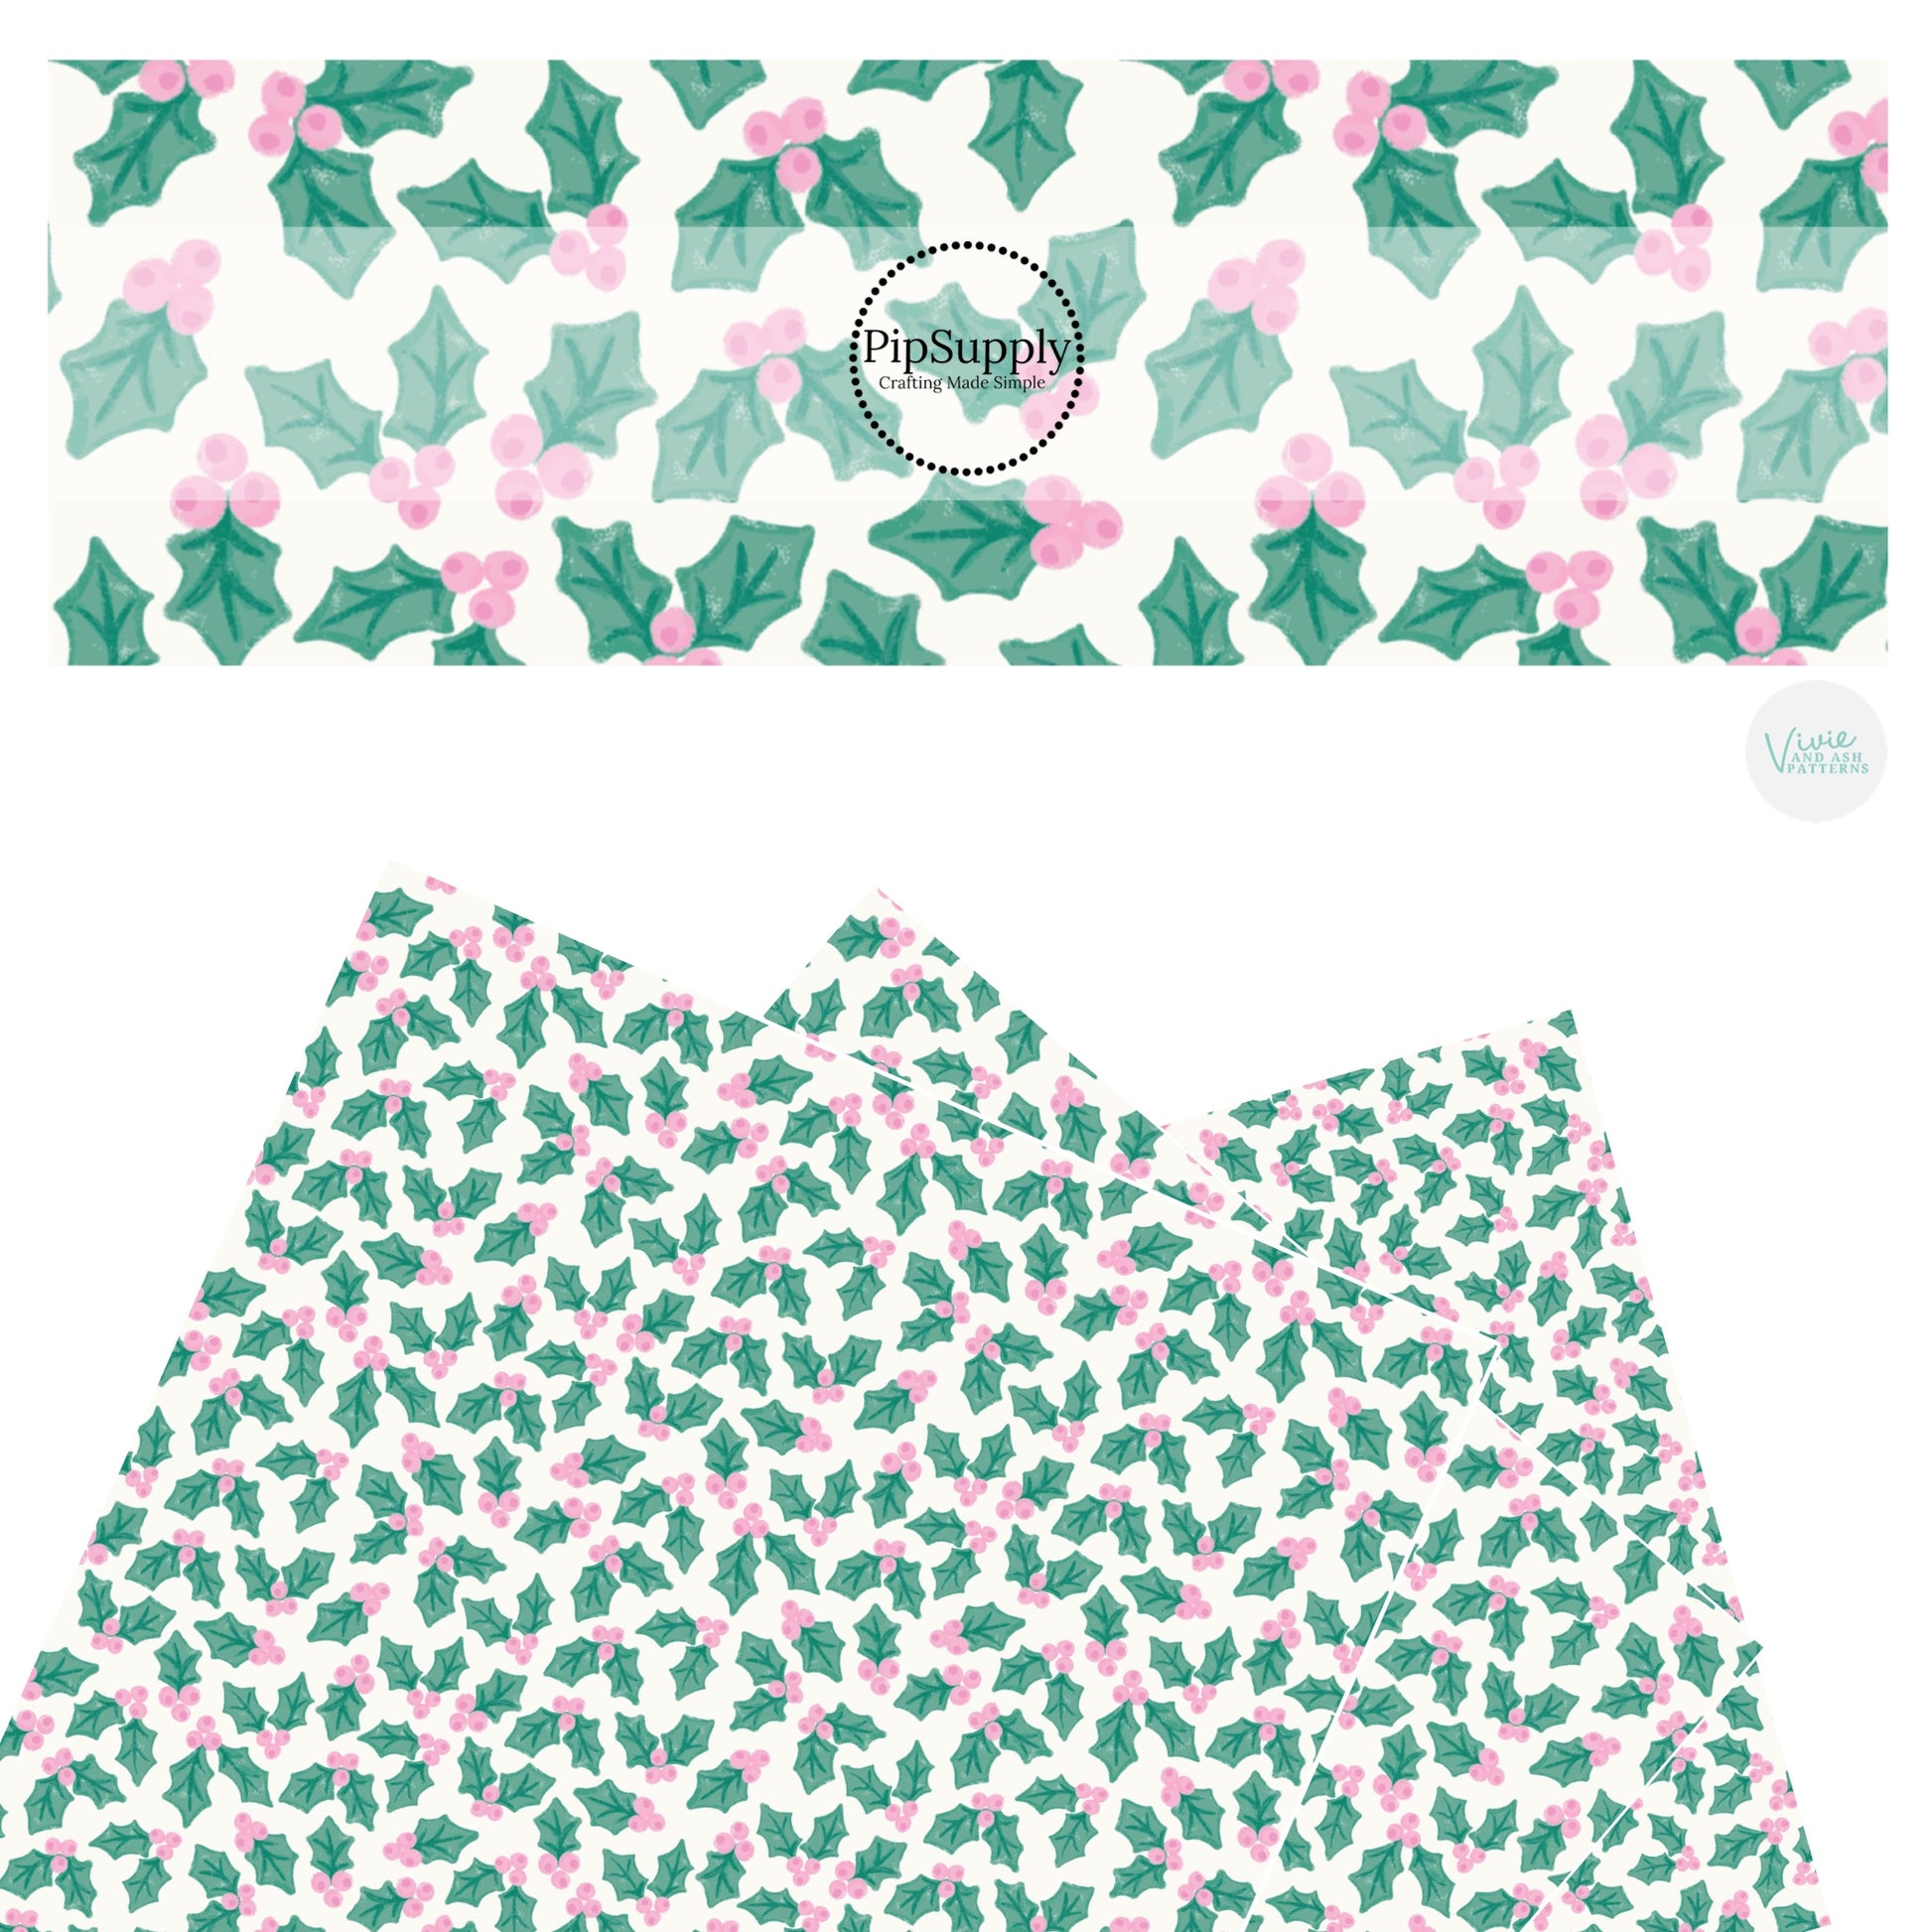 Pink berries on green holly leaves on cream faux leather sheets